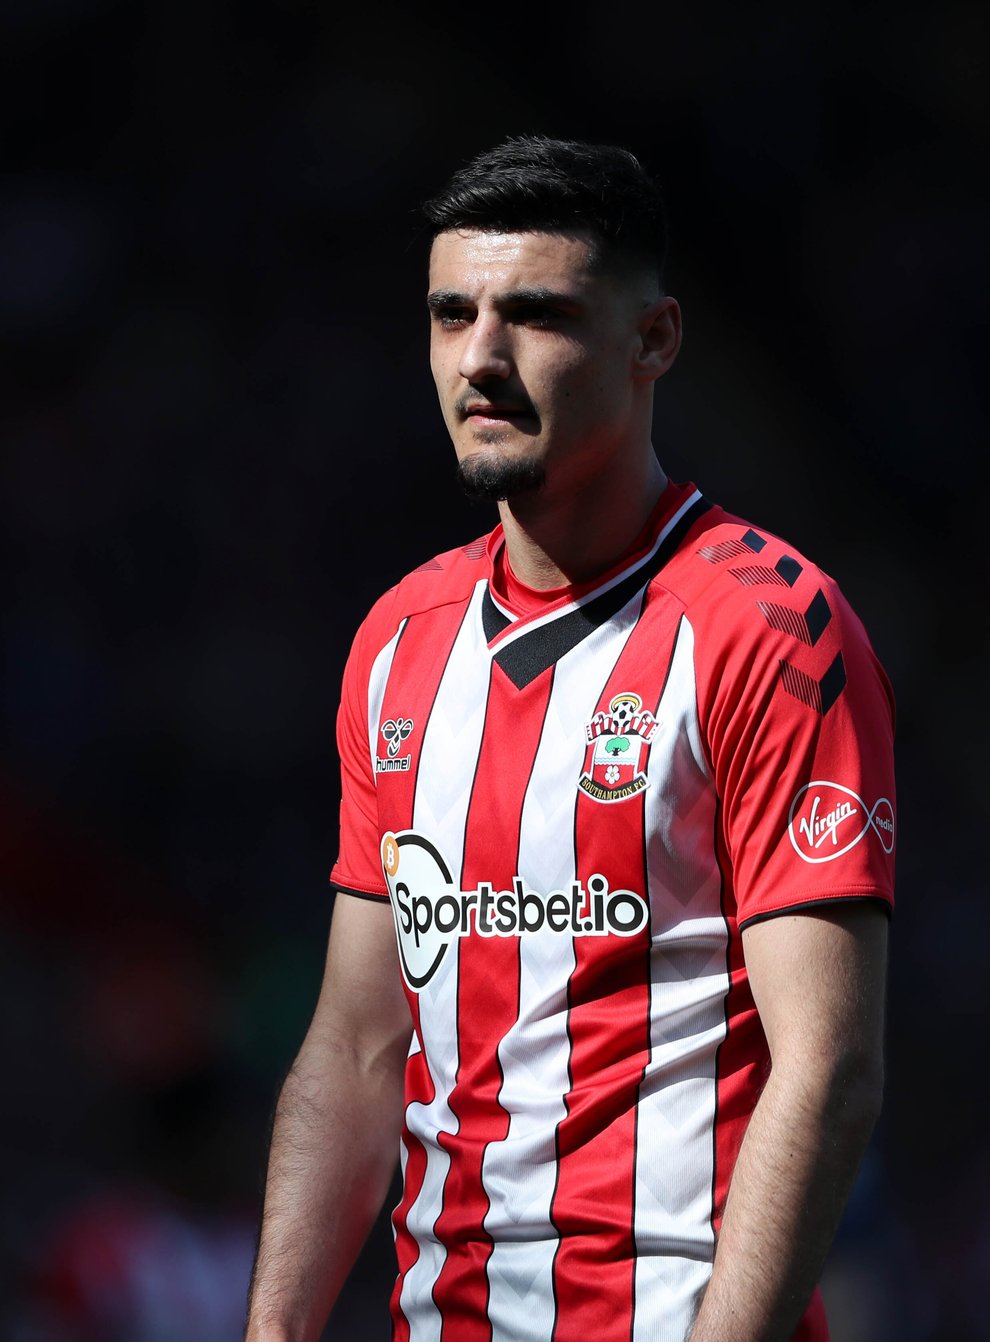 Chelsea striker Armando Broja, who spent last season on loan at Southampton, is believed to be open to a move to West Ham. (Kieran Cleeves/PA)